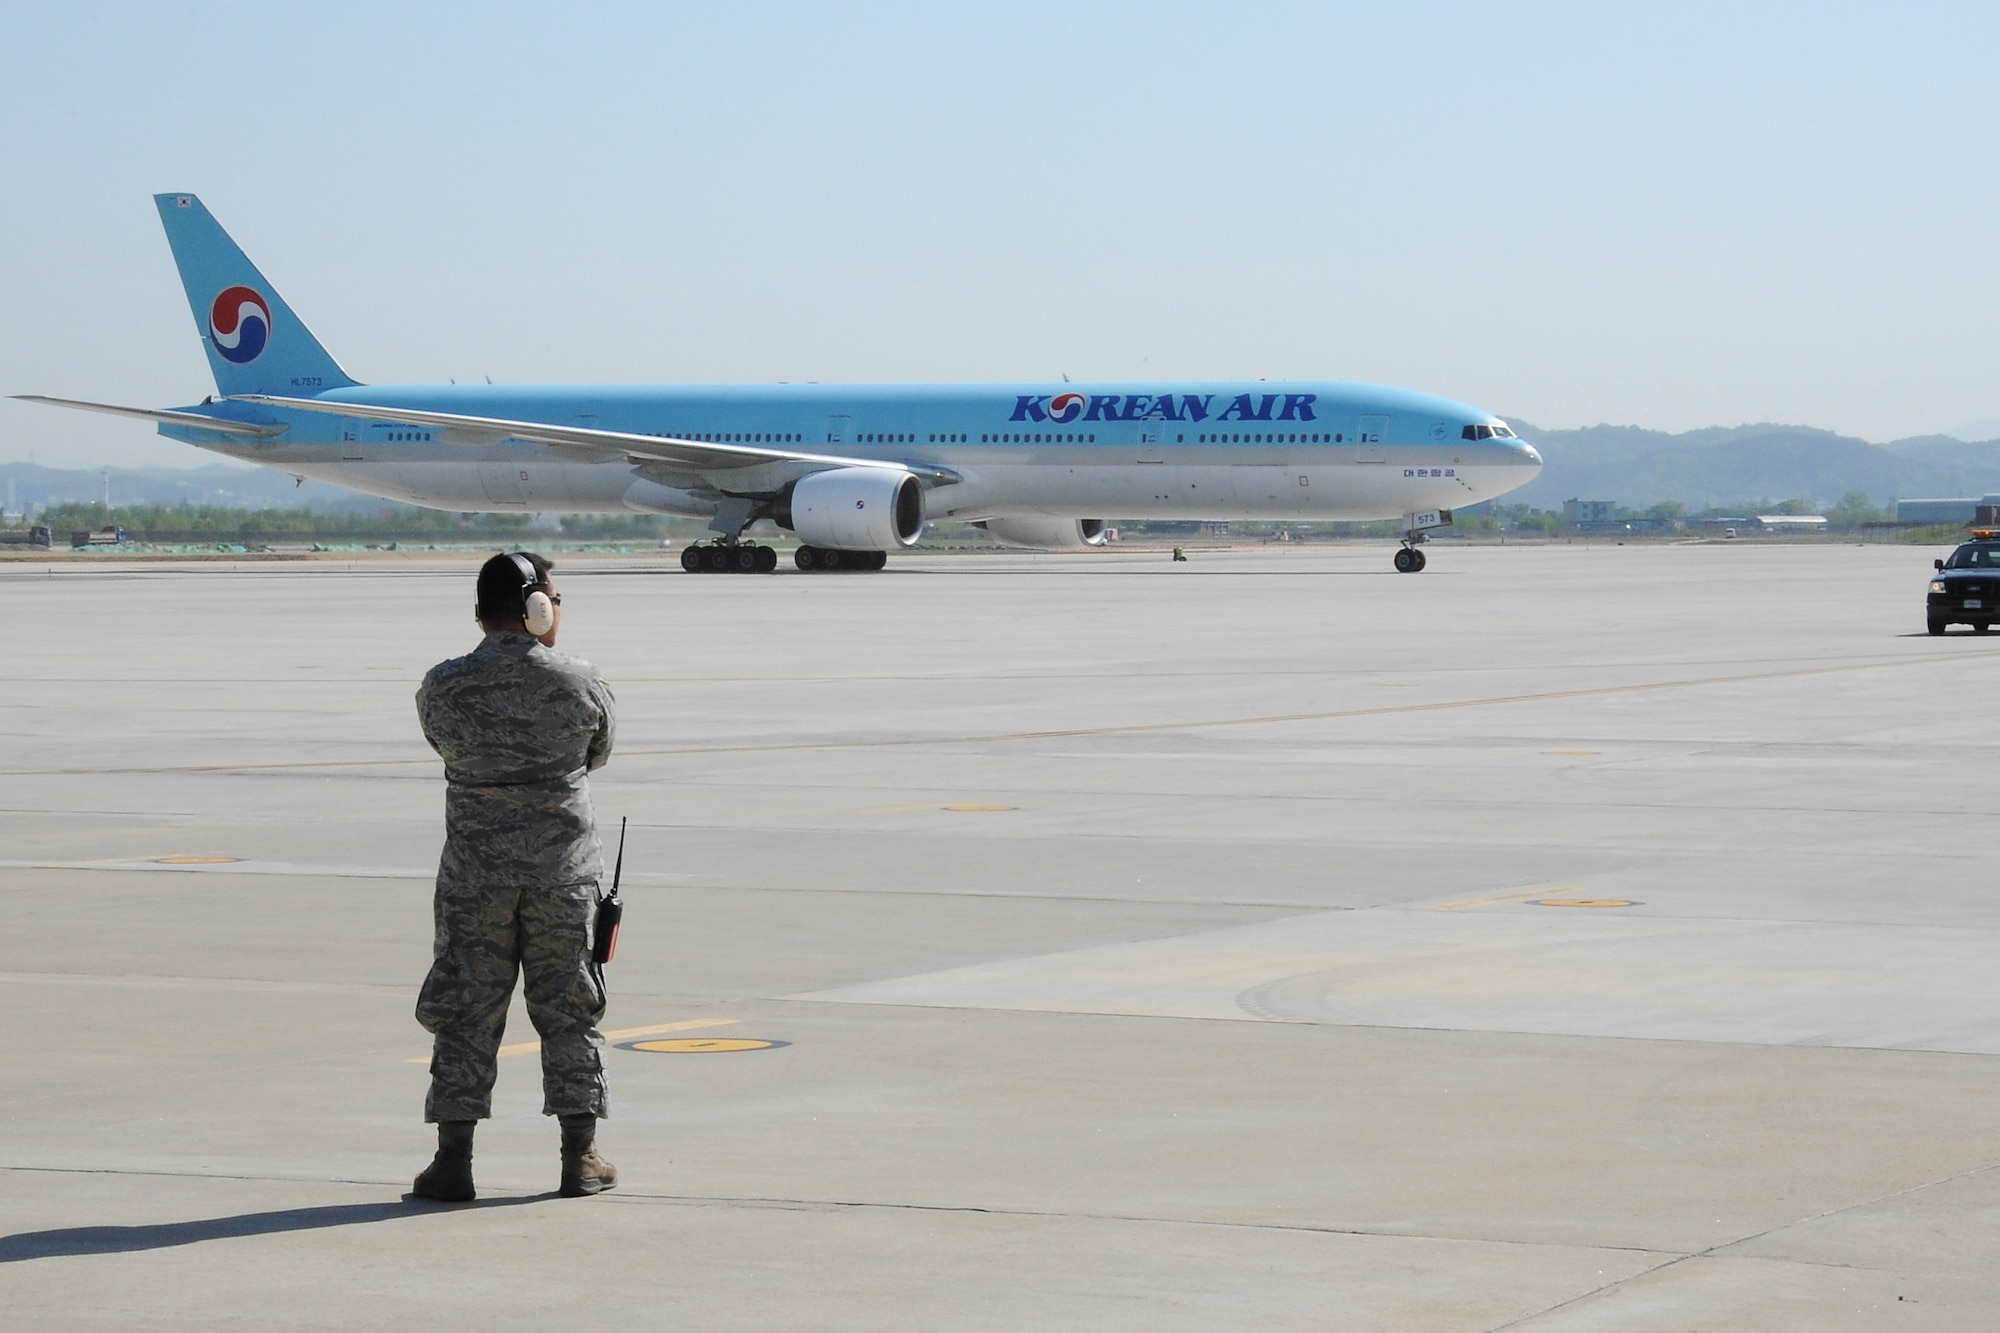 U.S. Air Force 1st Lt. Roed Mejia, 731st Air Mobility Squadron passenger services flight commander, prepares to direct an incoming Korean Air Boeing 777 aircraft during a Mutual Airlift Support Agreement (MASA) exercise at Osan Air Base, Republic of Korea, May 4, 2018. The MASA demonstrates the alliance between the United States and ROK, which enabled the 731st AMS to process passengers and load personnel baggage onto a Korean commercial aircraft. (U.S. Air Force photo by Tech. Sgt. Ashley Tyler)